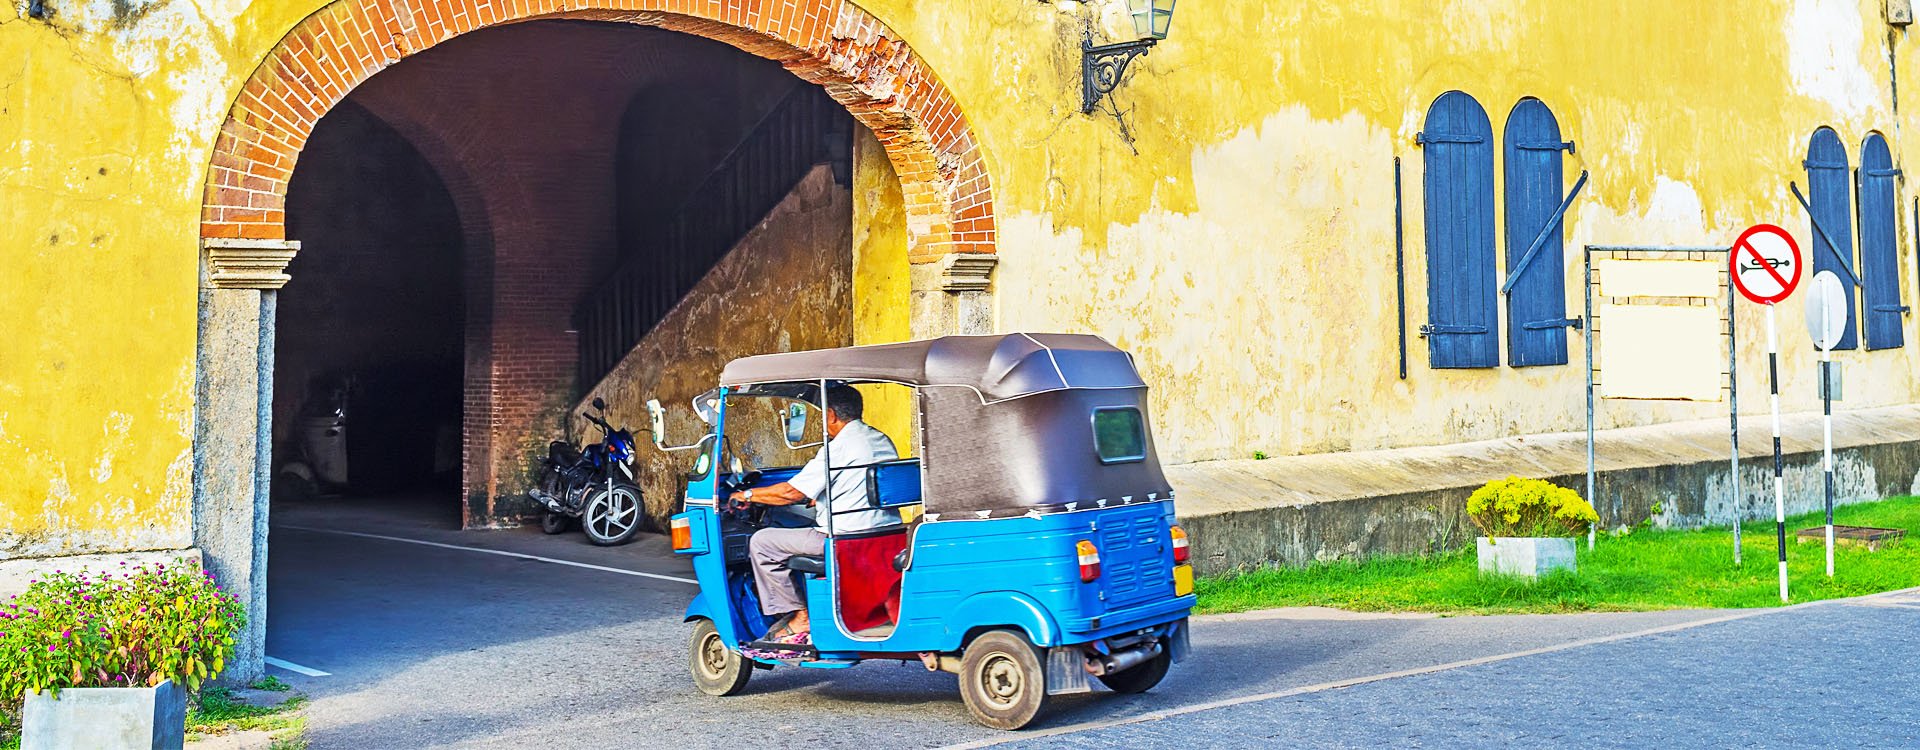 The tuk tuk riding to the exit of Galle Fort through the Old Gate, Sri Lanka.